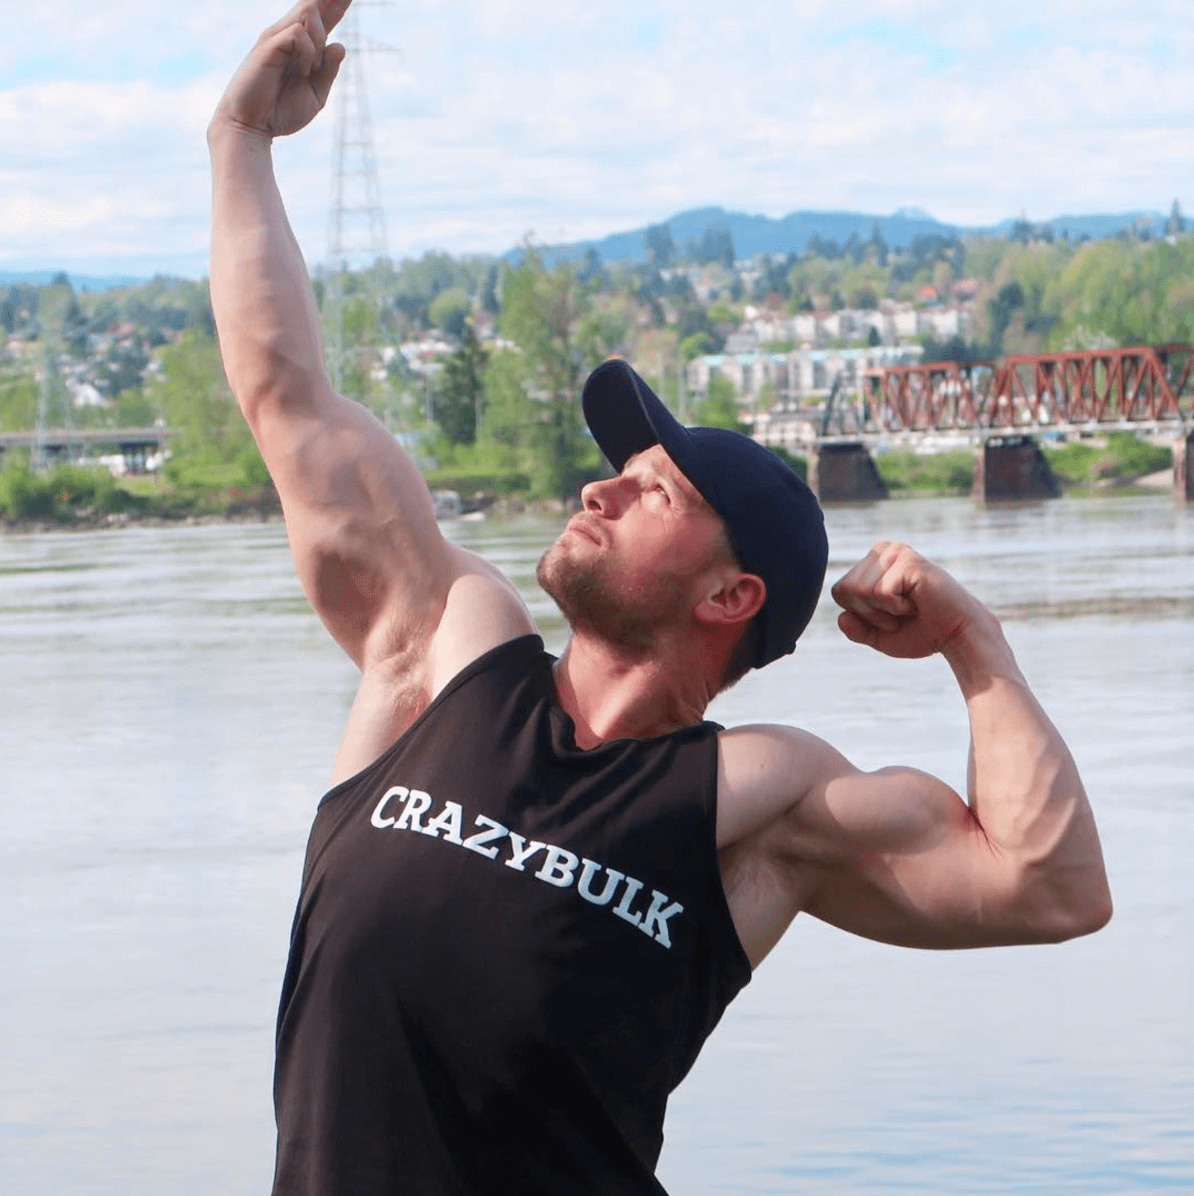 Buy steroids in canada legally